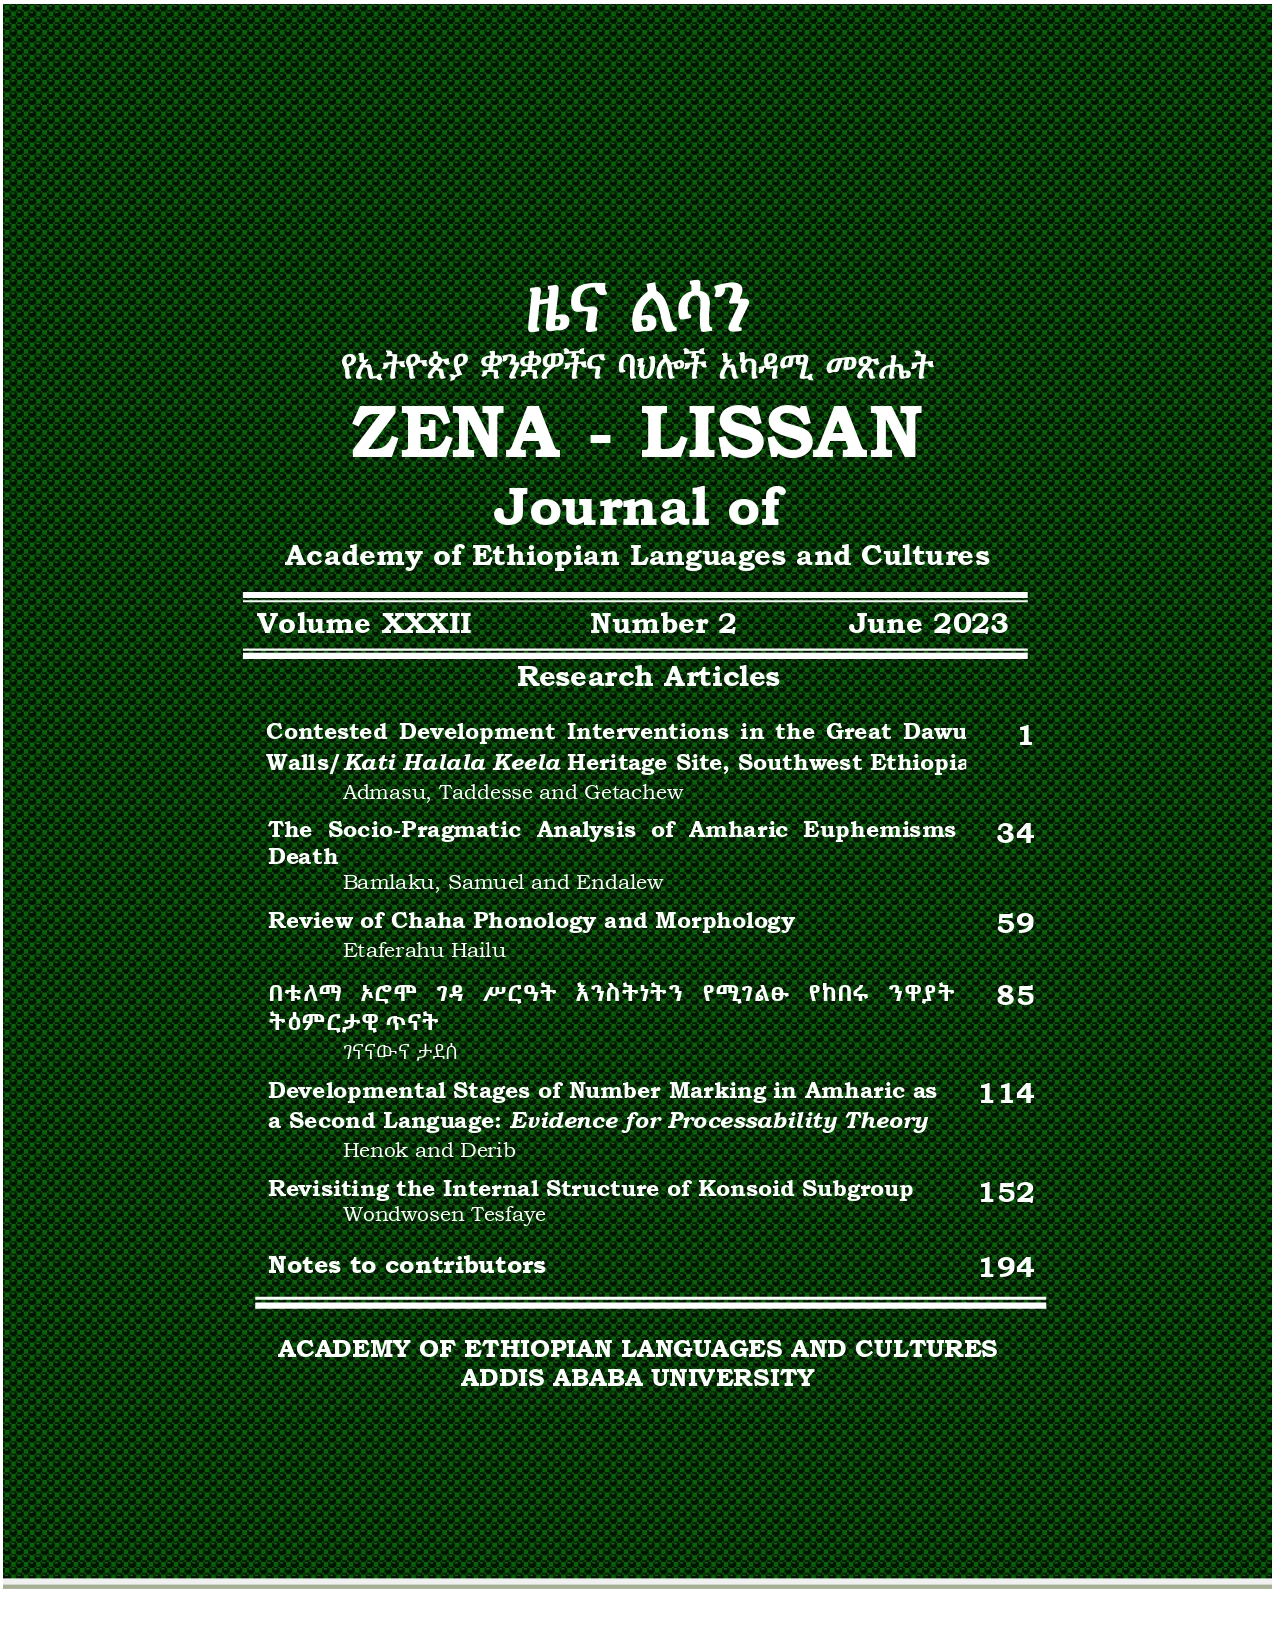 					View Vol. 32 No. 2 (2023): ZENA-LISSAN, JOURNAL OF ACADEMY OF ETHOPIAN LANGUAGES AND CULTURES
				